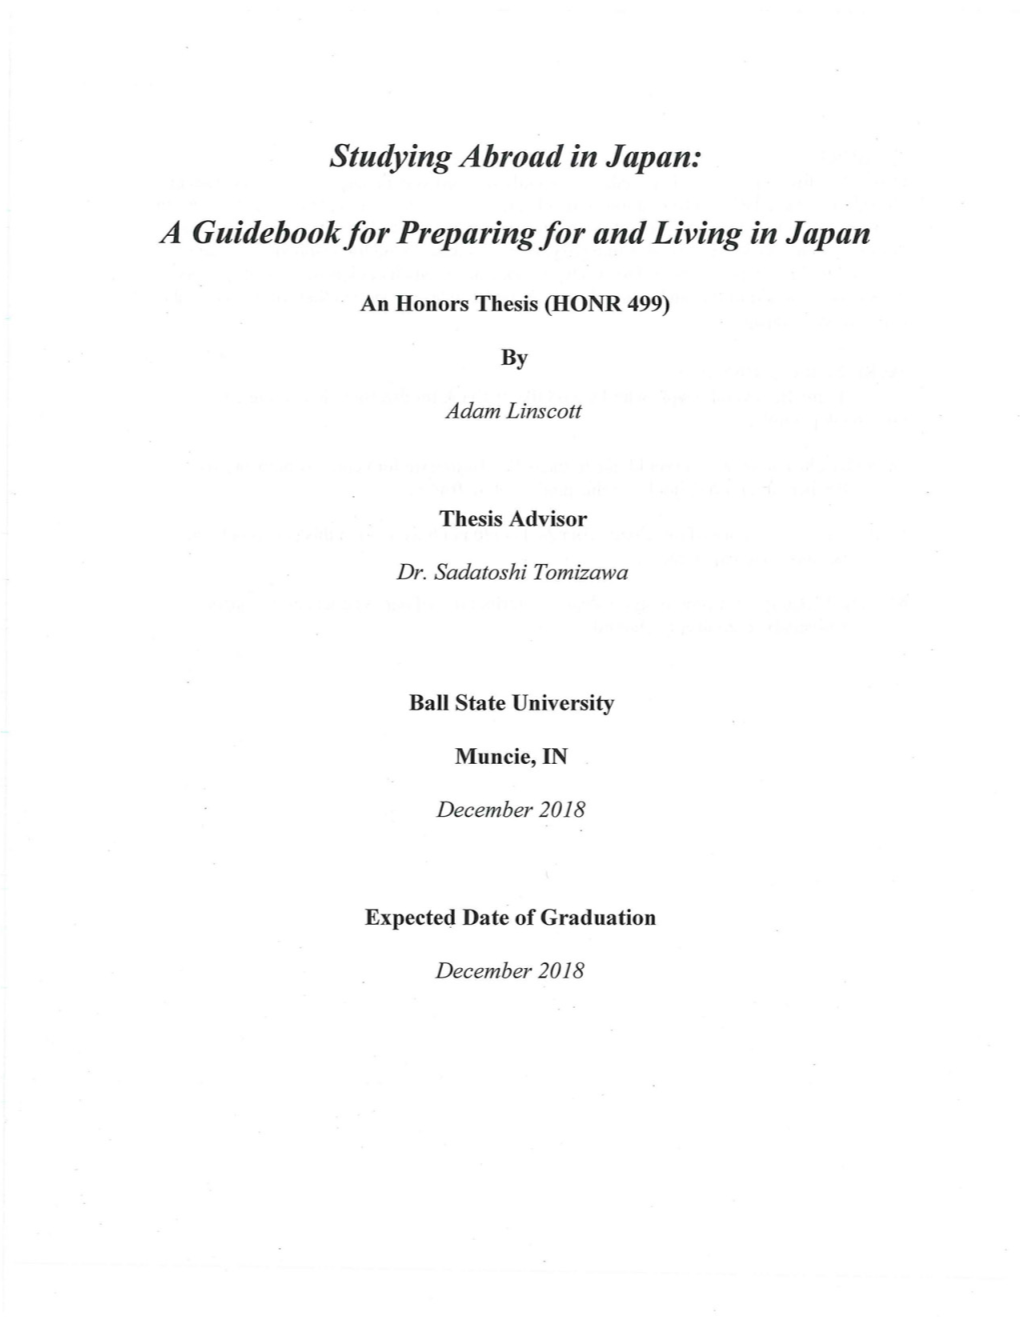 Studying Abroad in Japan: a Guidebook for Preparing for and Living in Japan